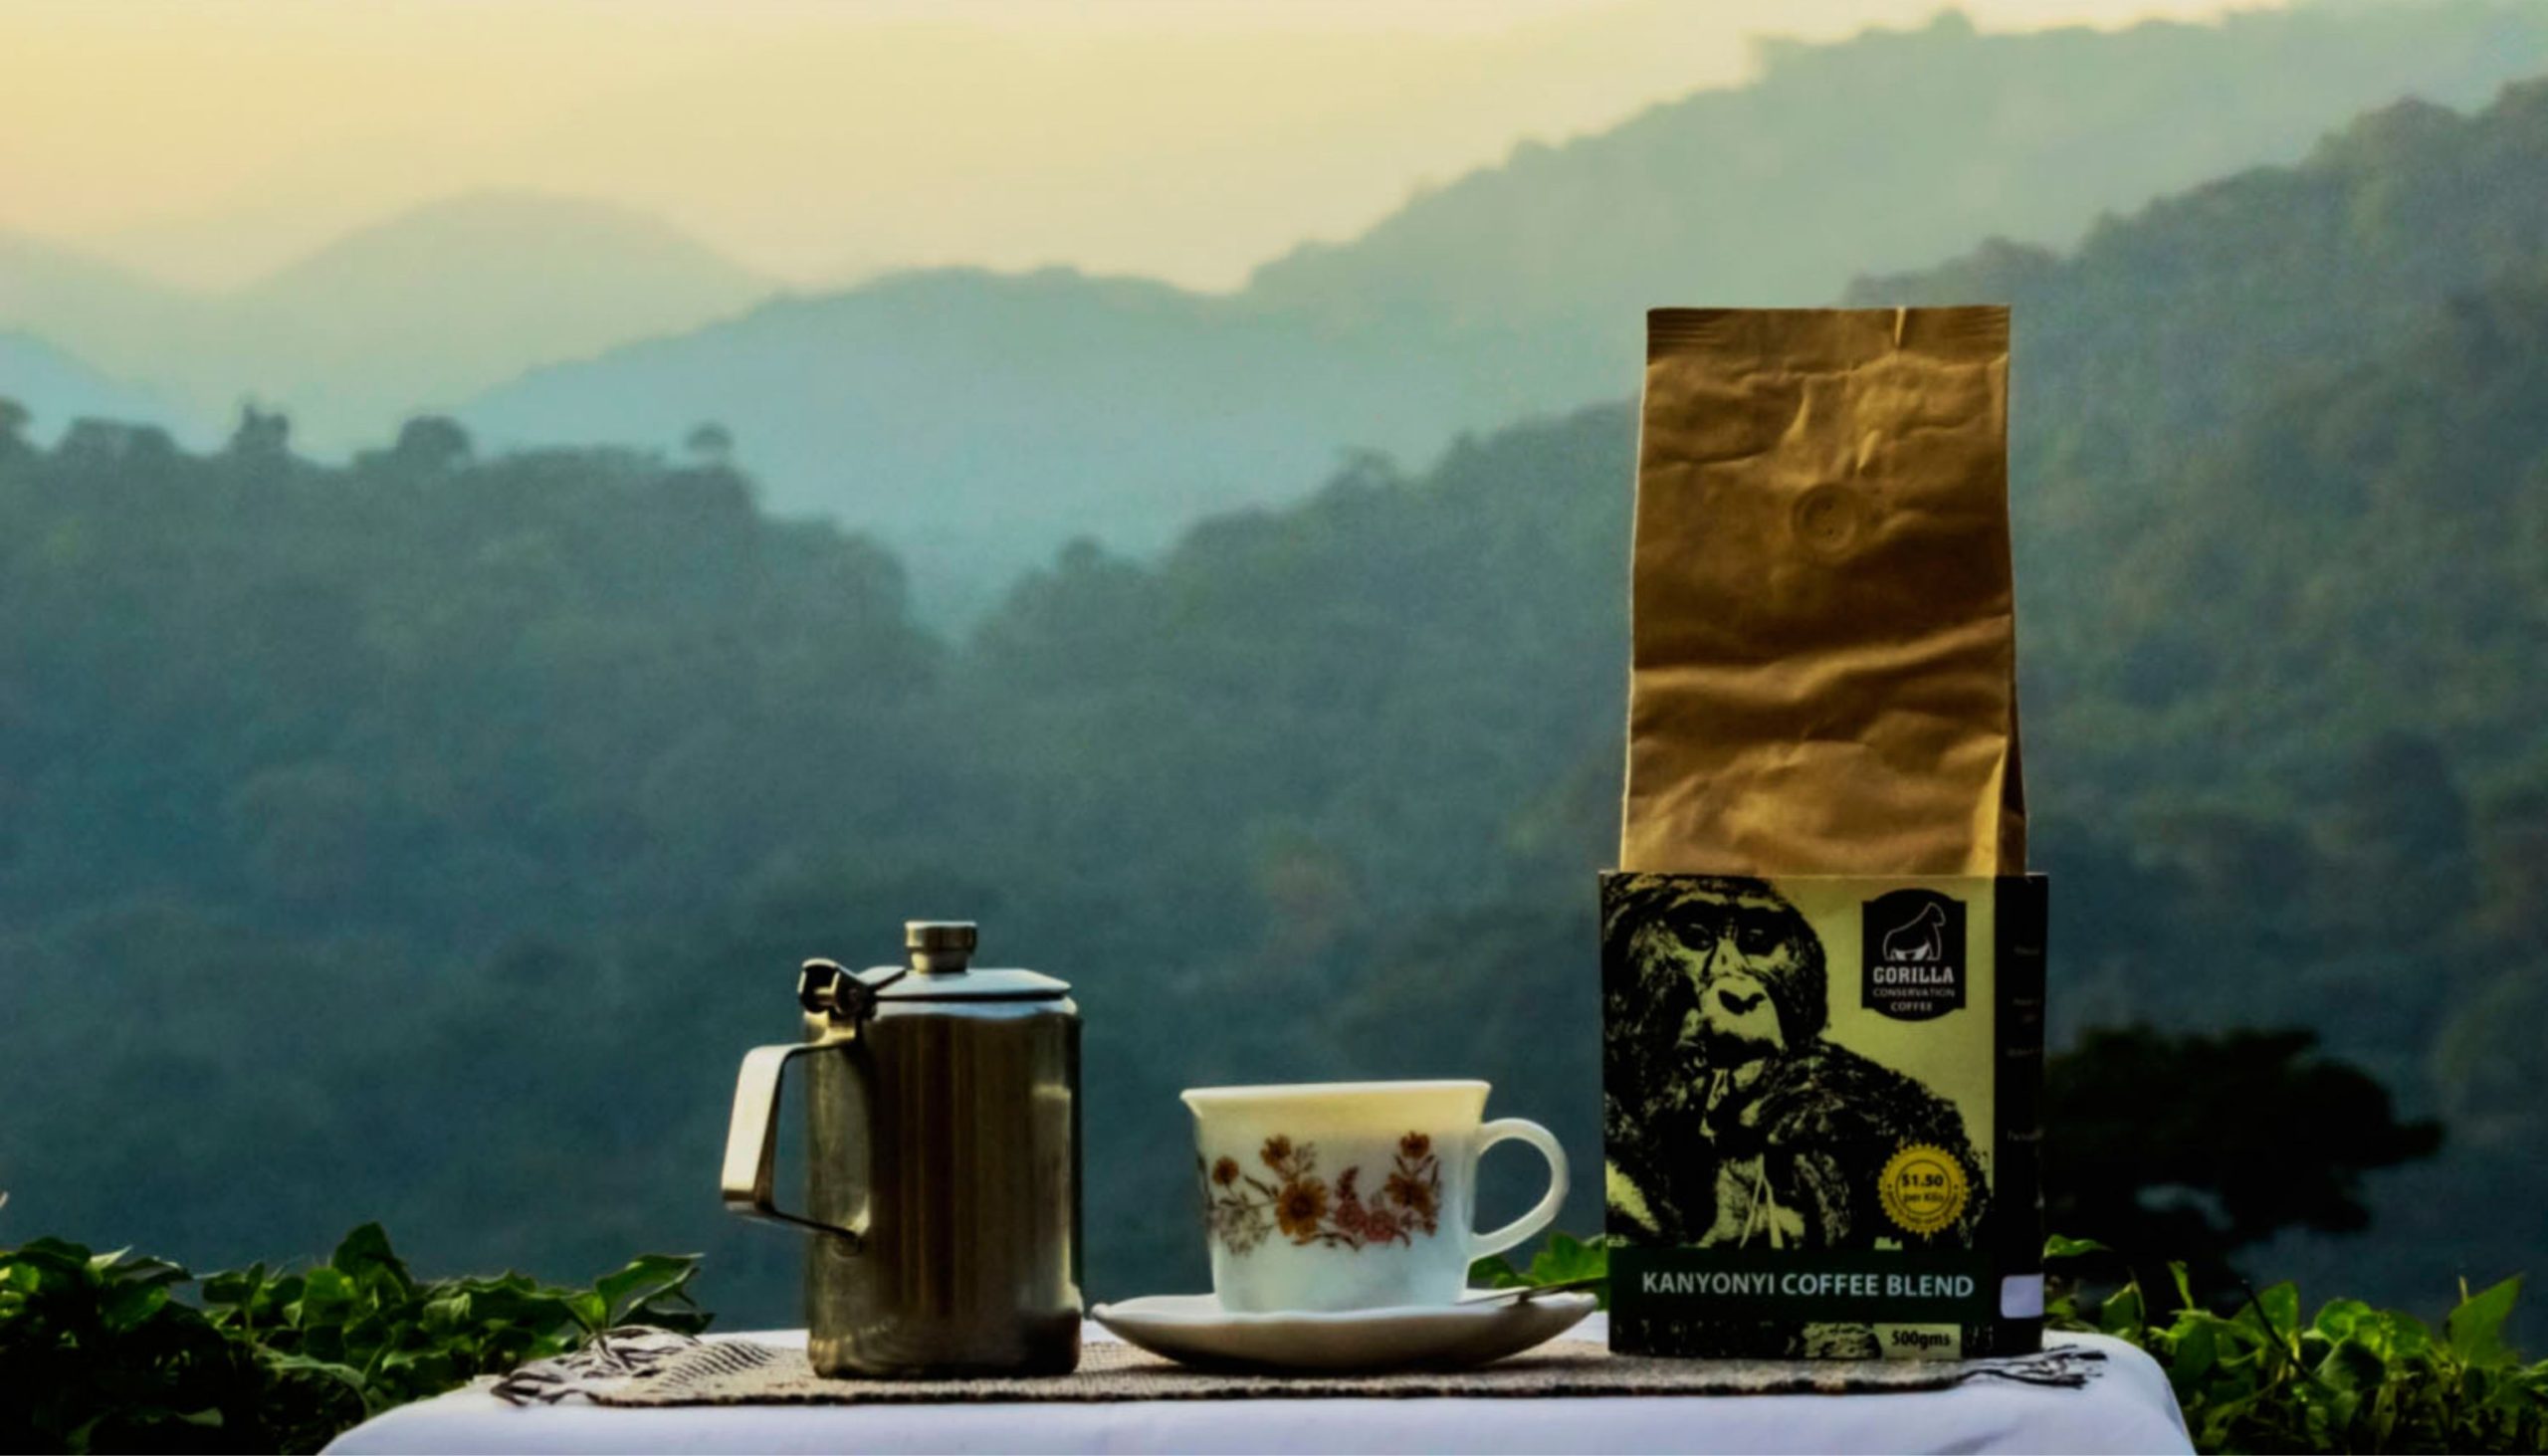 Gorilla Conservation Coffee: Saving Gorillas One Sip At a Time.